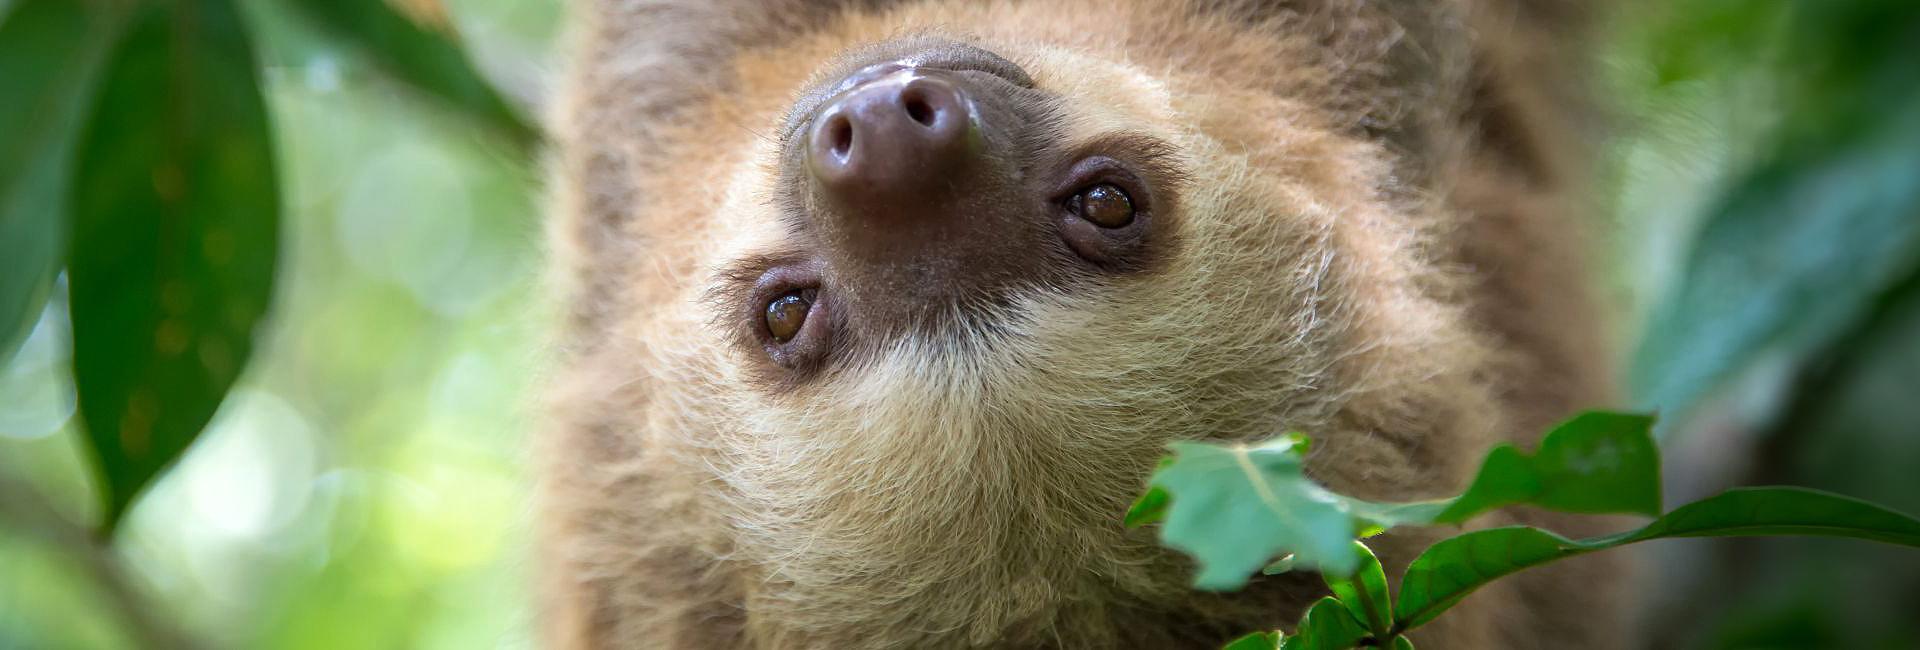 Working With Sloths